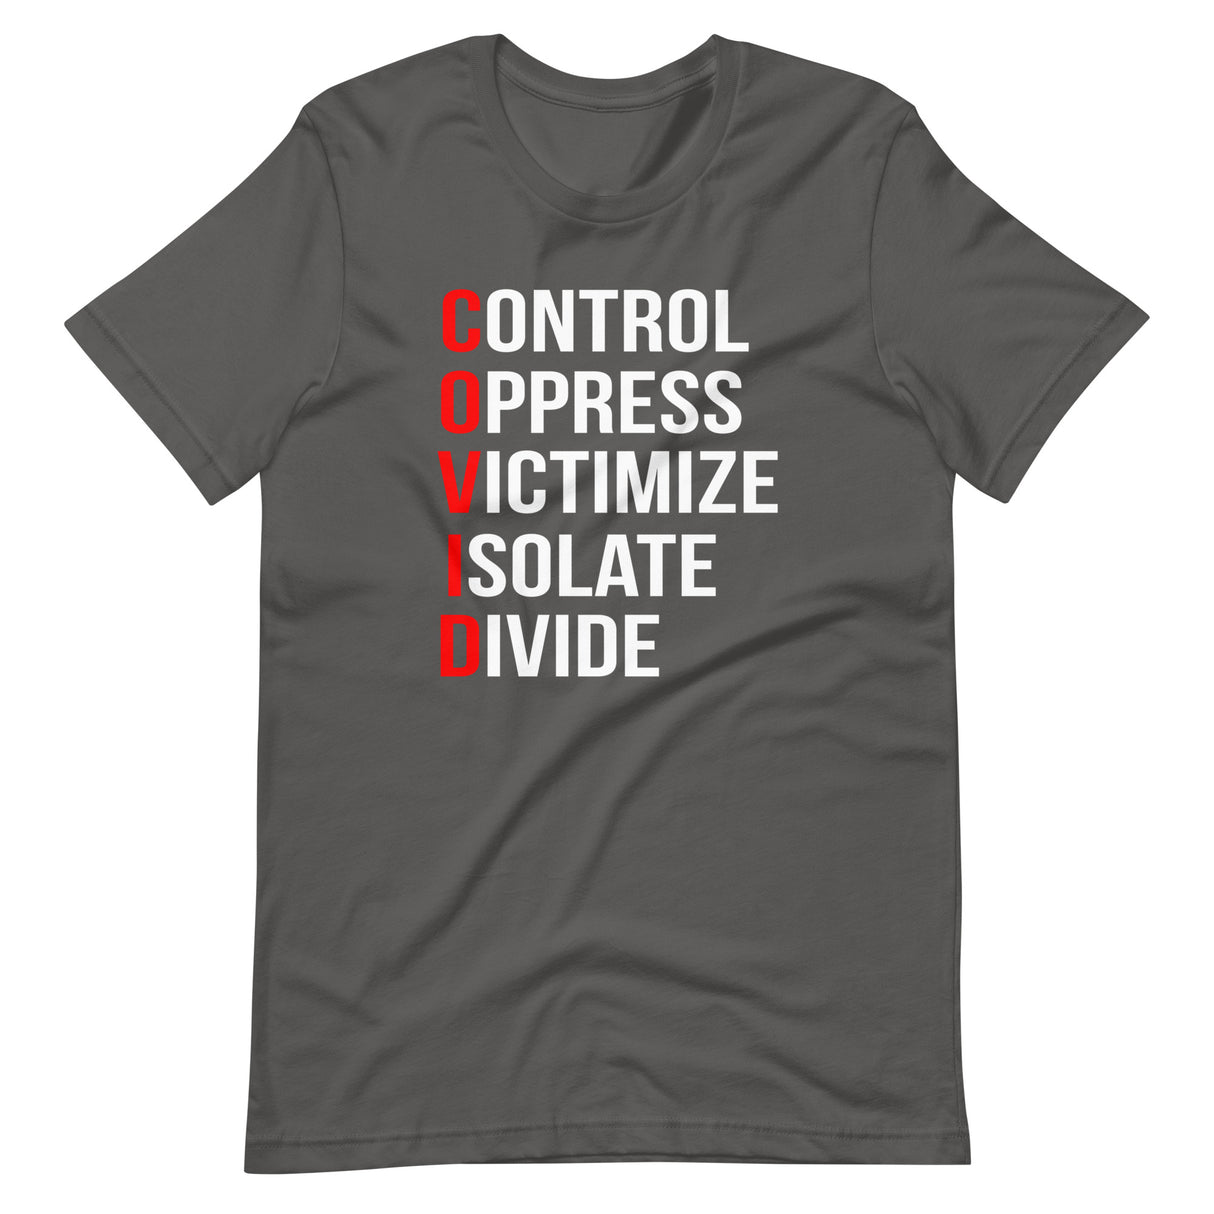 Control Oppress Victimize Isolate Divide Shirt - Libertarian Country